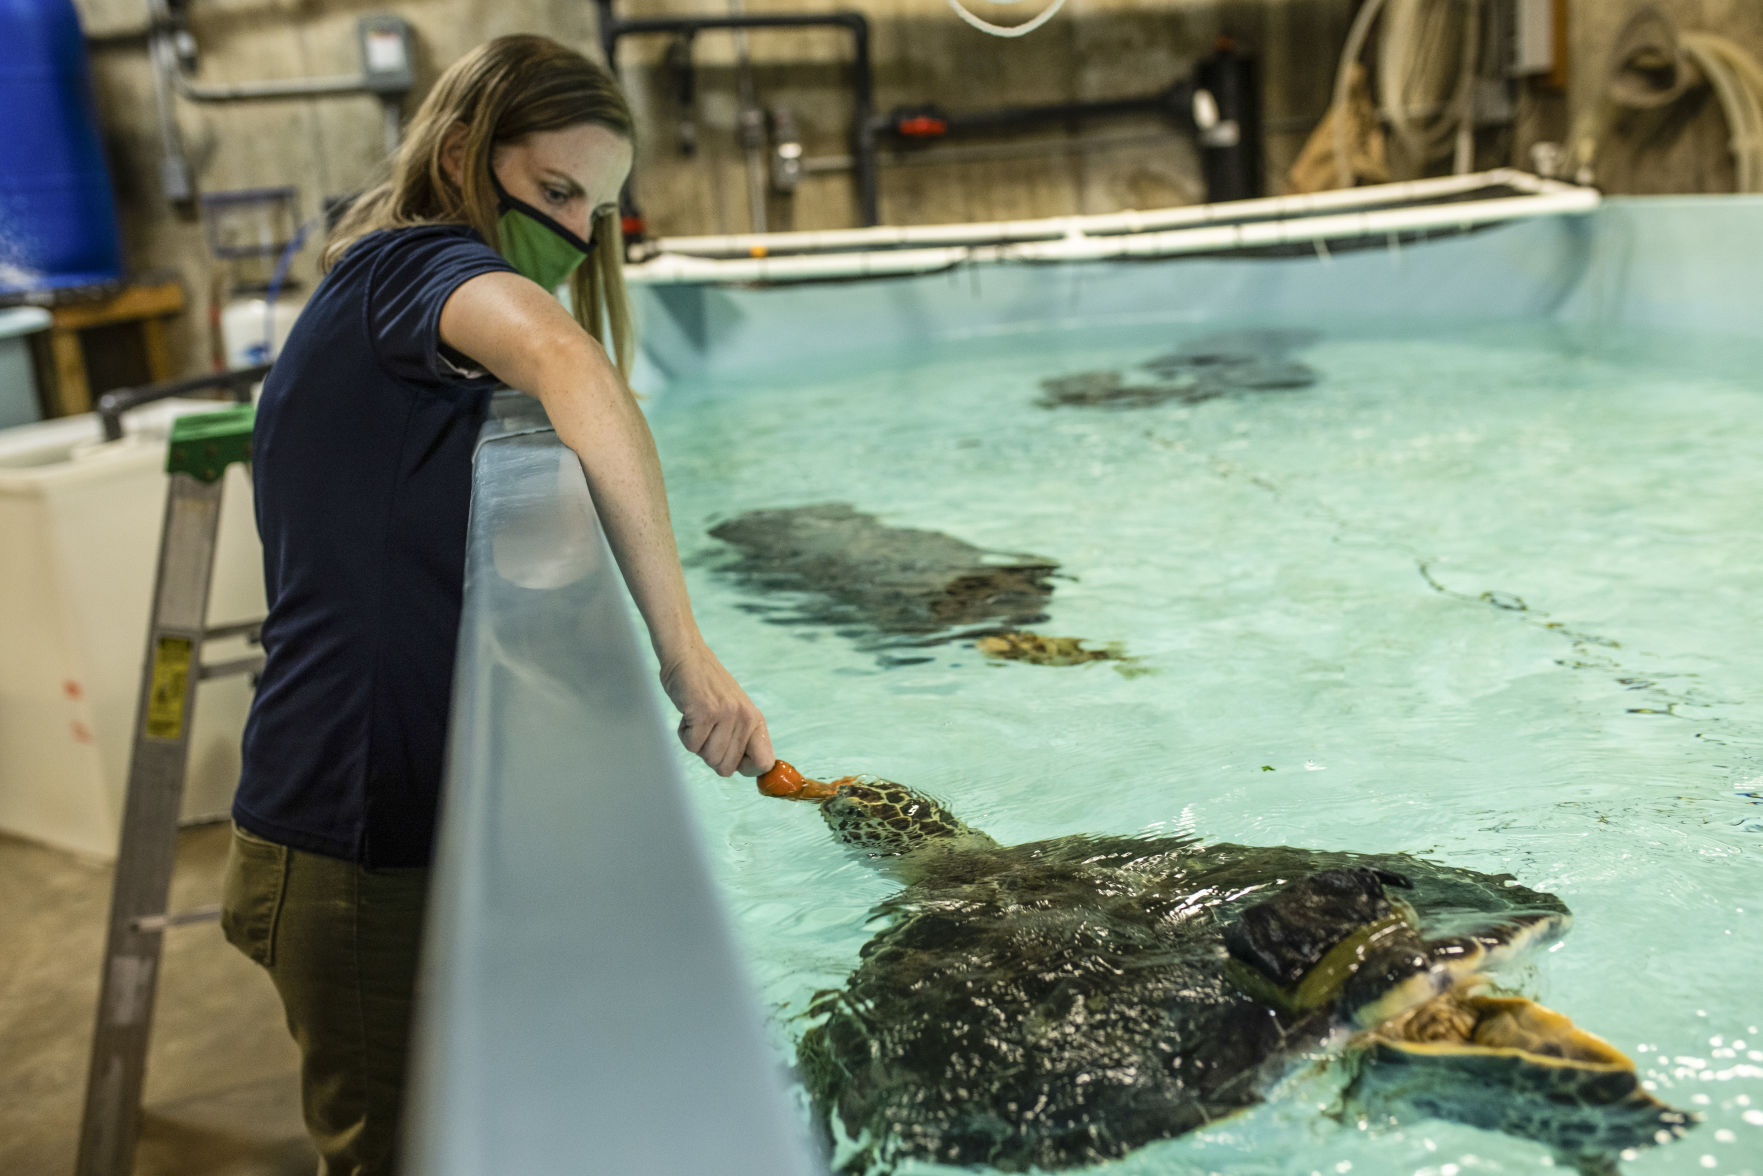 Curator of Living Collections at the Mississippi River Museum & Aquarium, Abby Urban, feeds a Diamondback Terrapin, that visitors can see as part of the new Behind the Scenes Aquarium Tours. PHOTO CREDIT: Jacob Fiscus